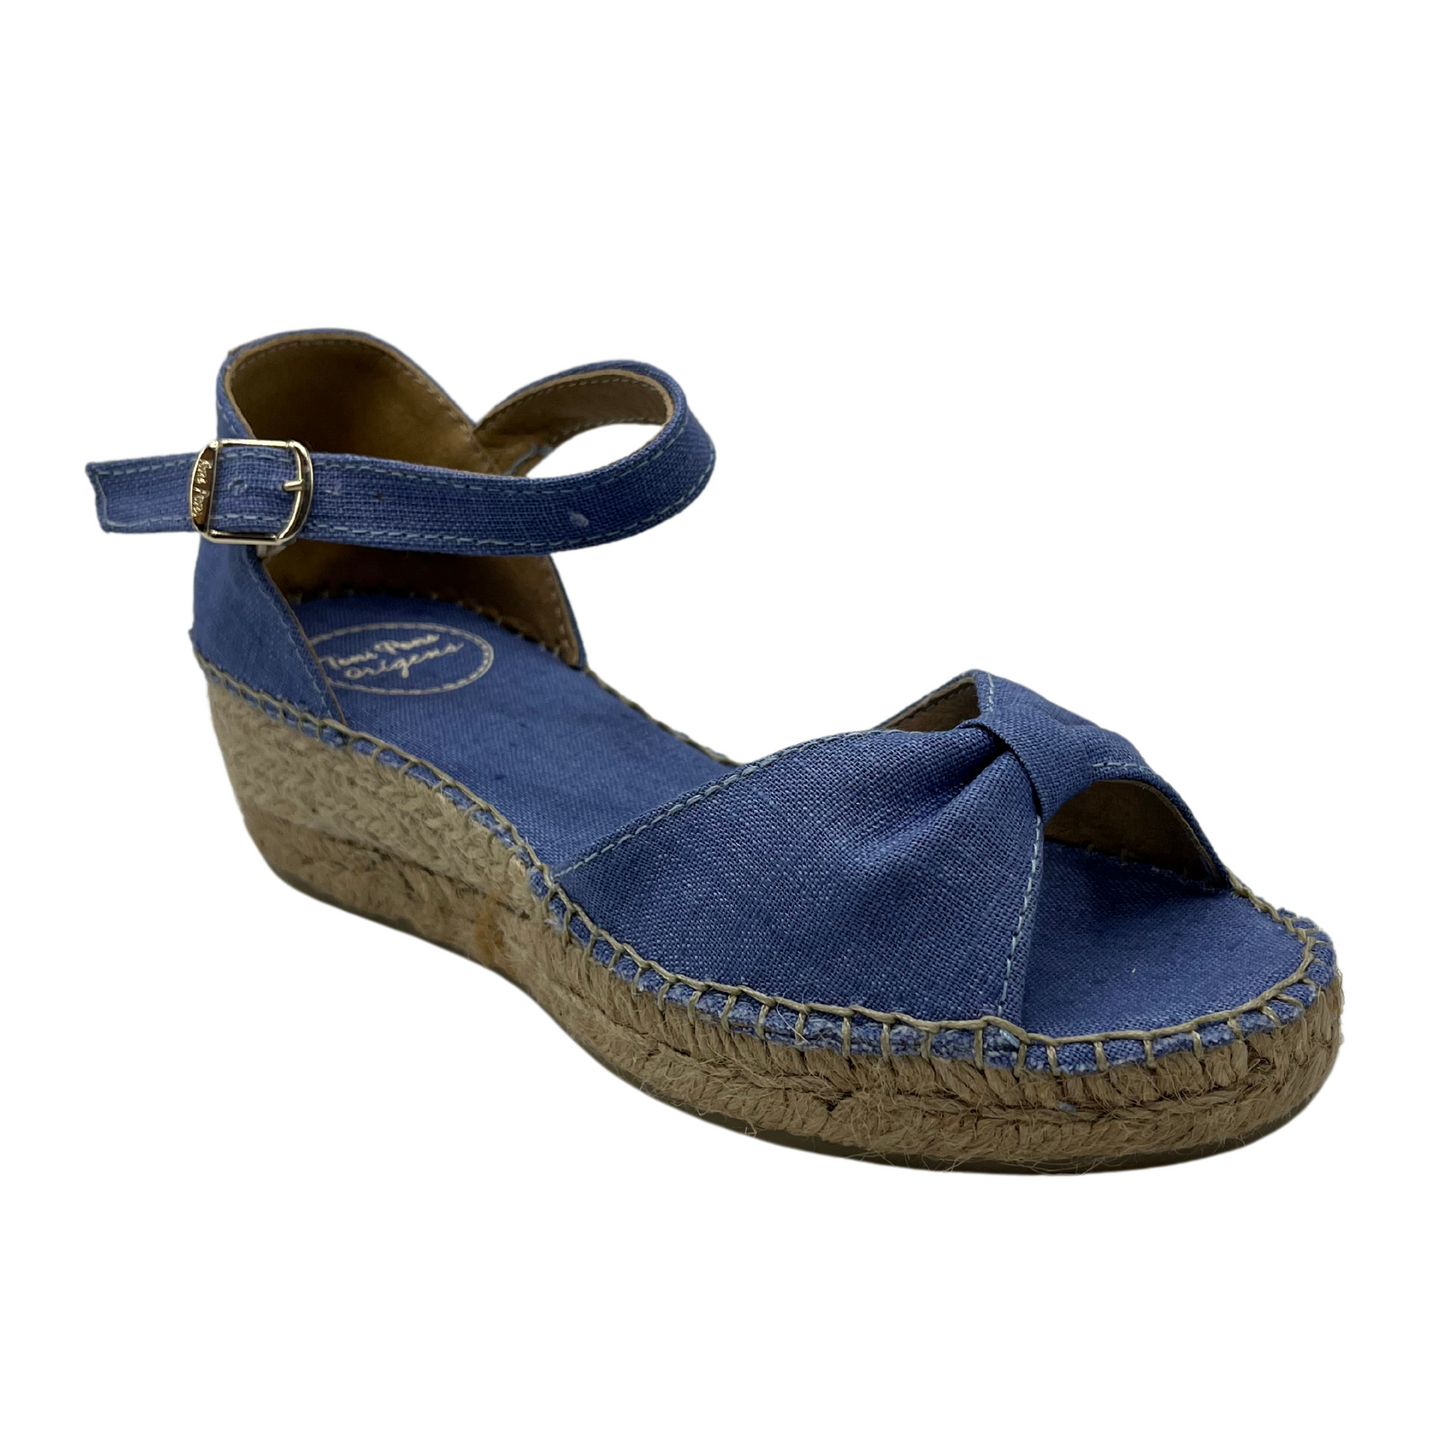 45 degree angled view of blue low wedge sandal with bow strap on toe and buckle strap on ankle